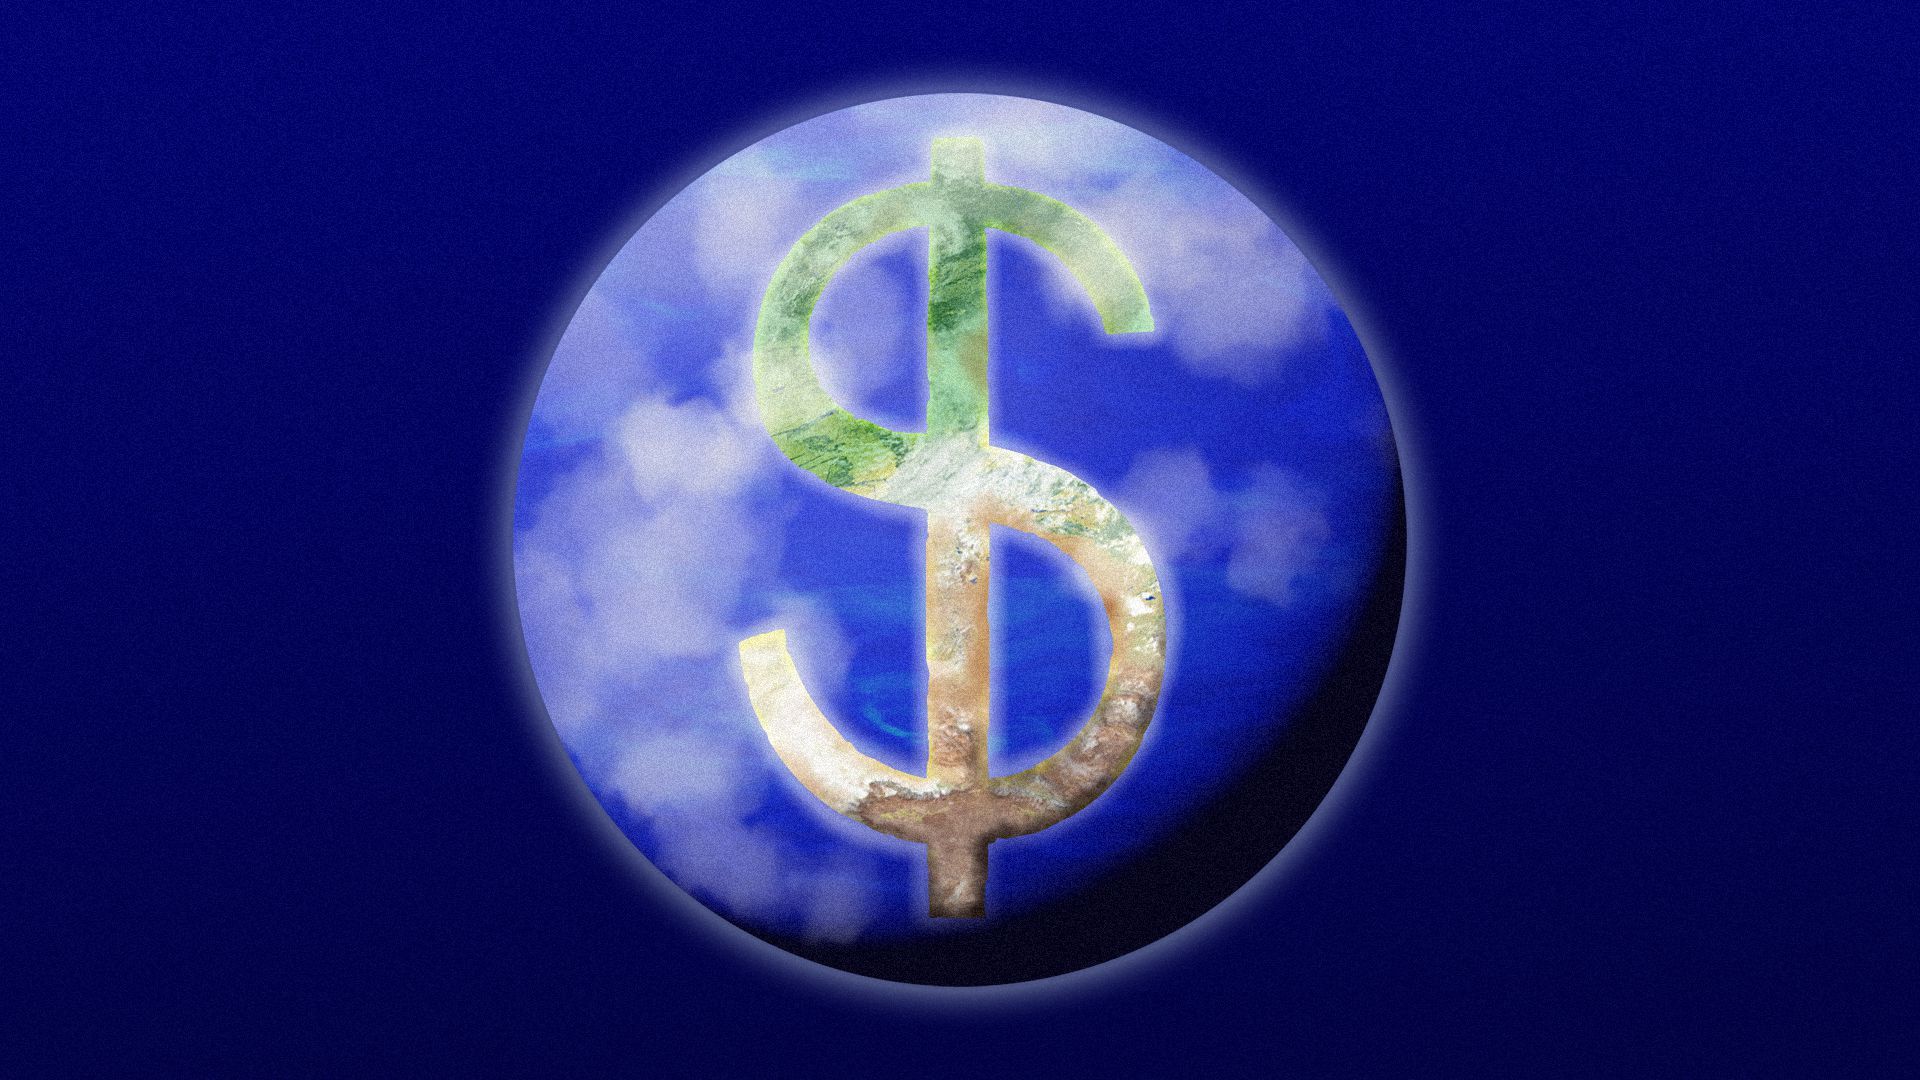 Illustration of a dollar sign on the Earth.